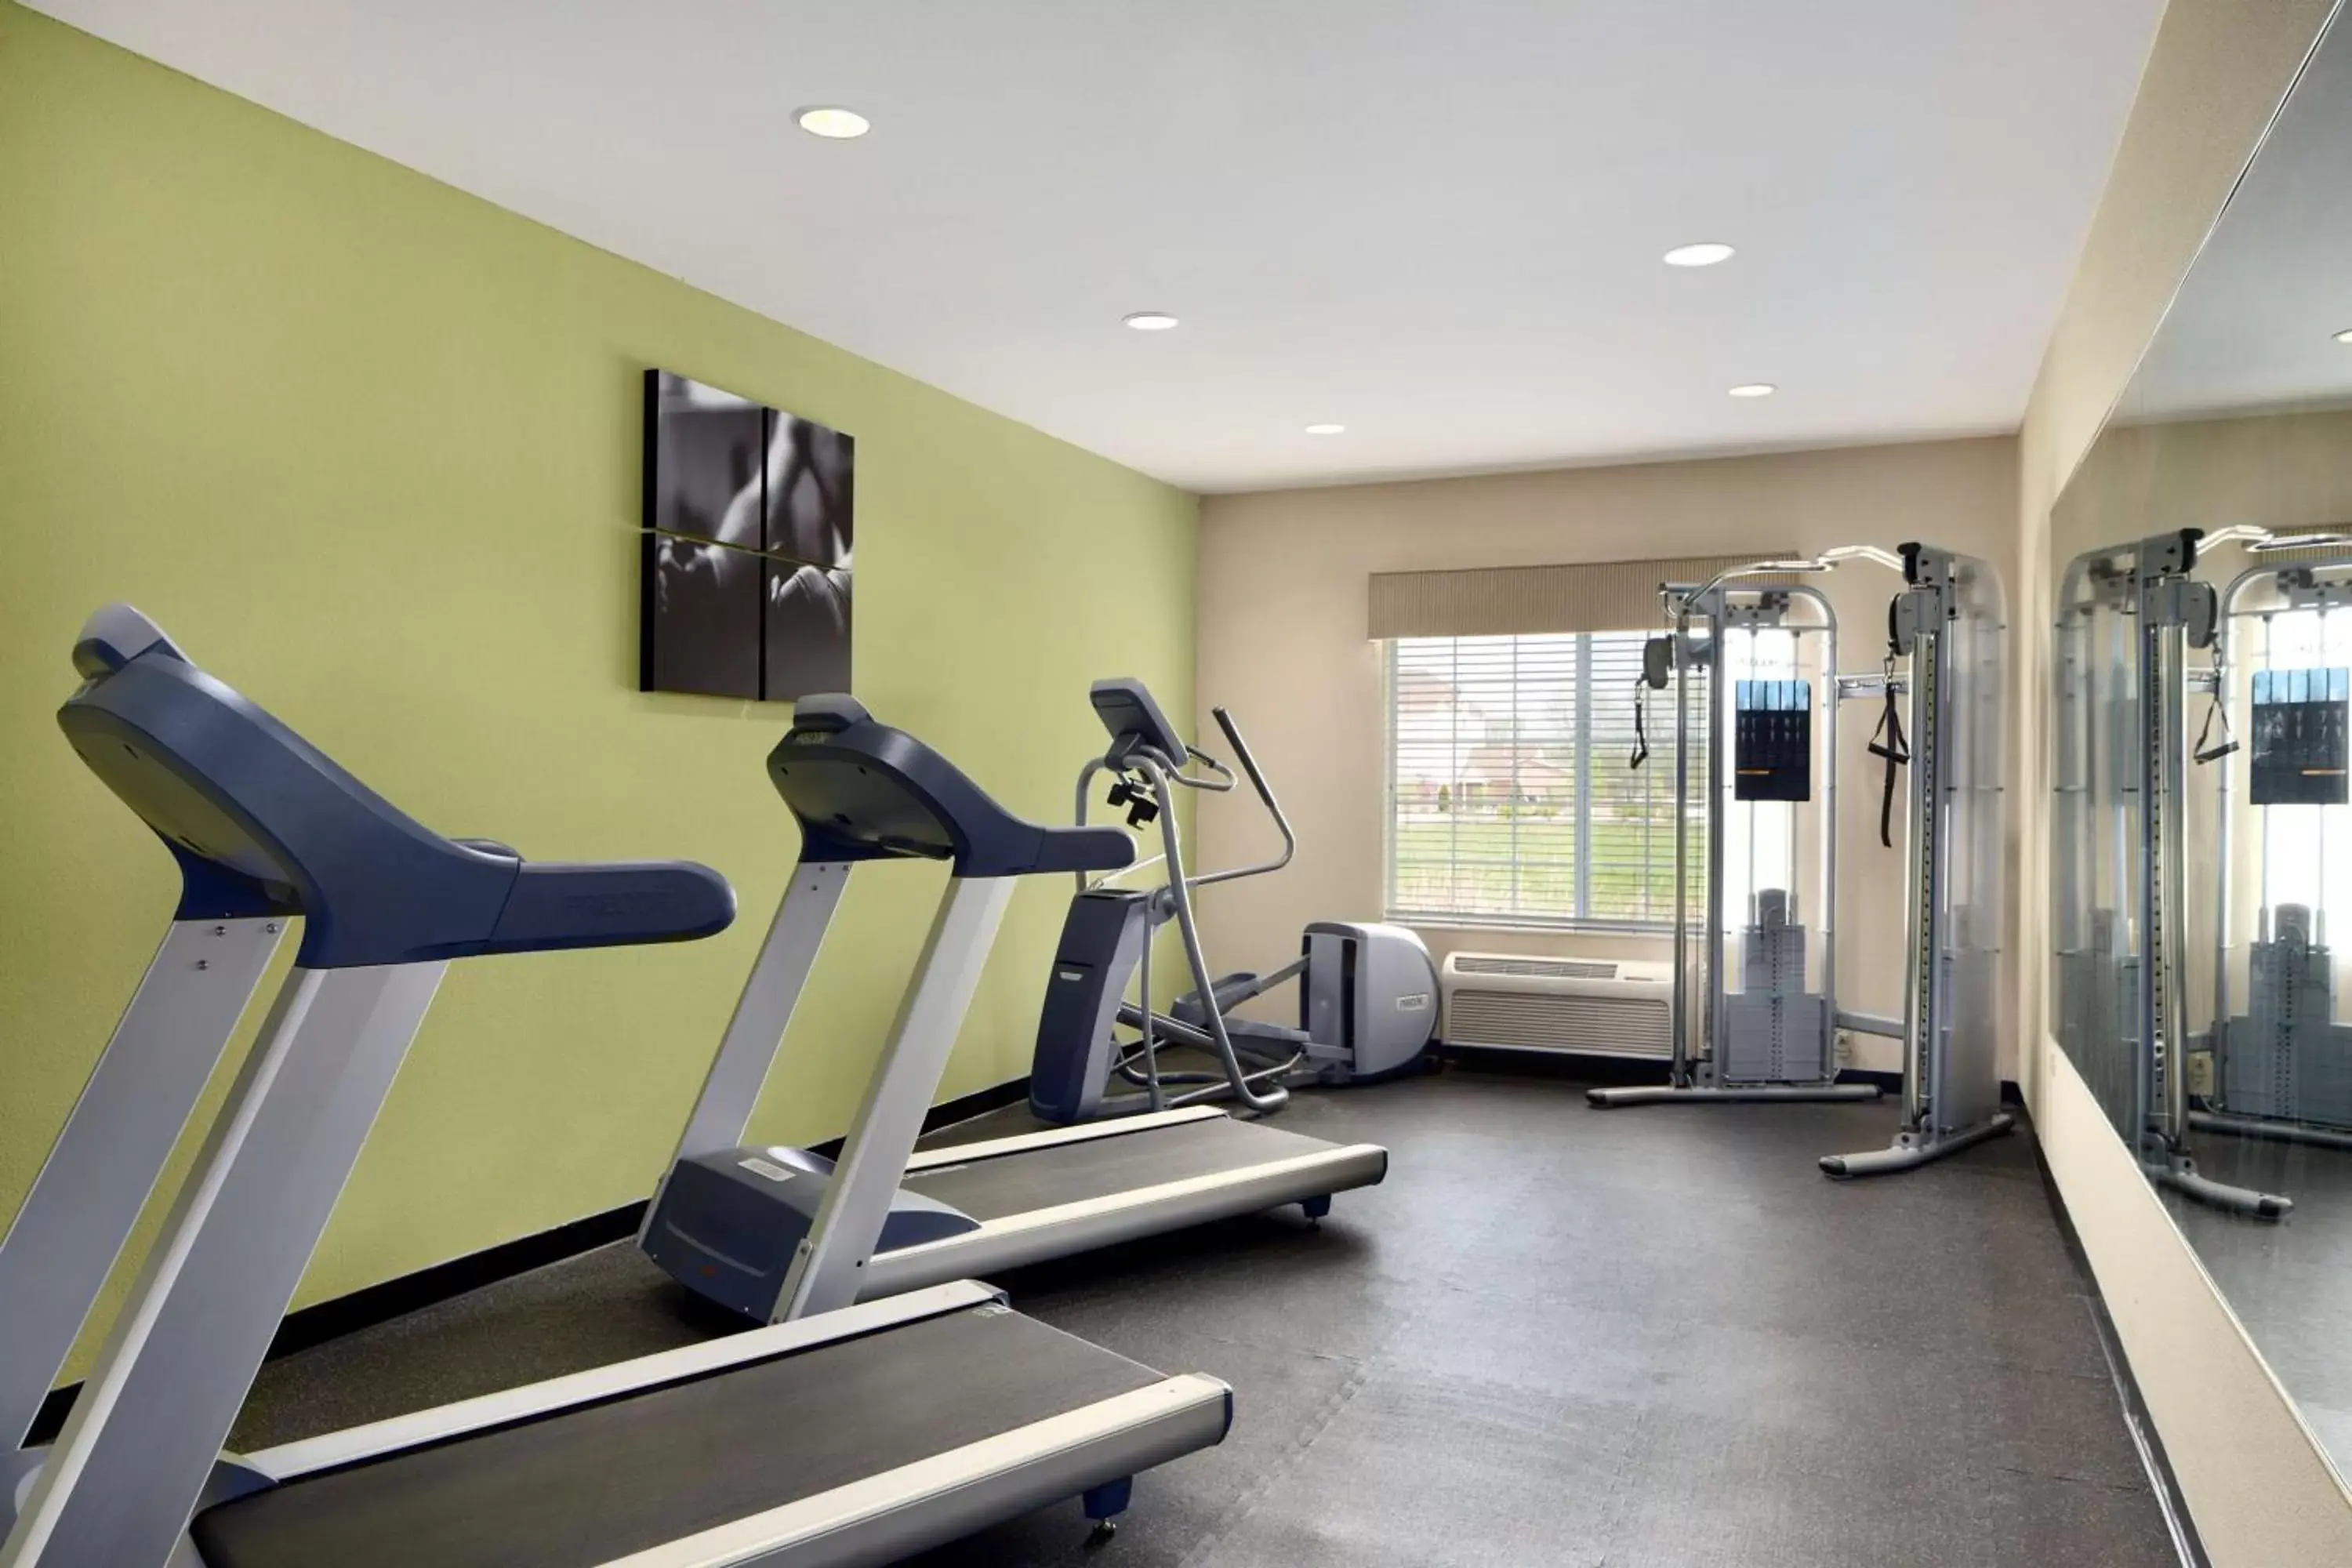 Activities, Fitness Center/Facilities in Country Inn & Suites by Radisson, Michigan City, IN